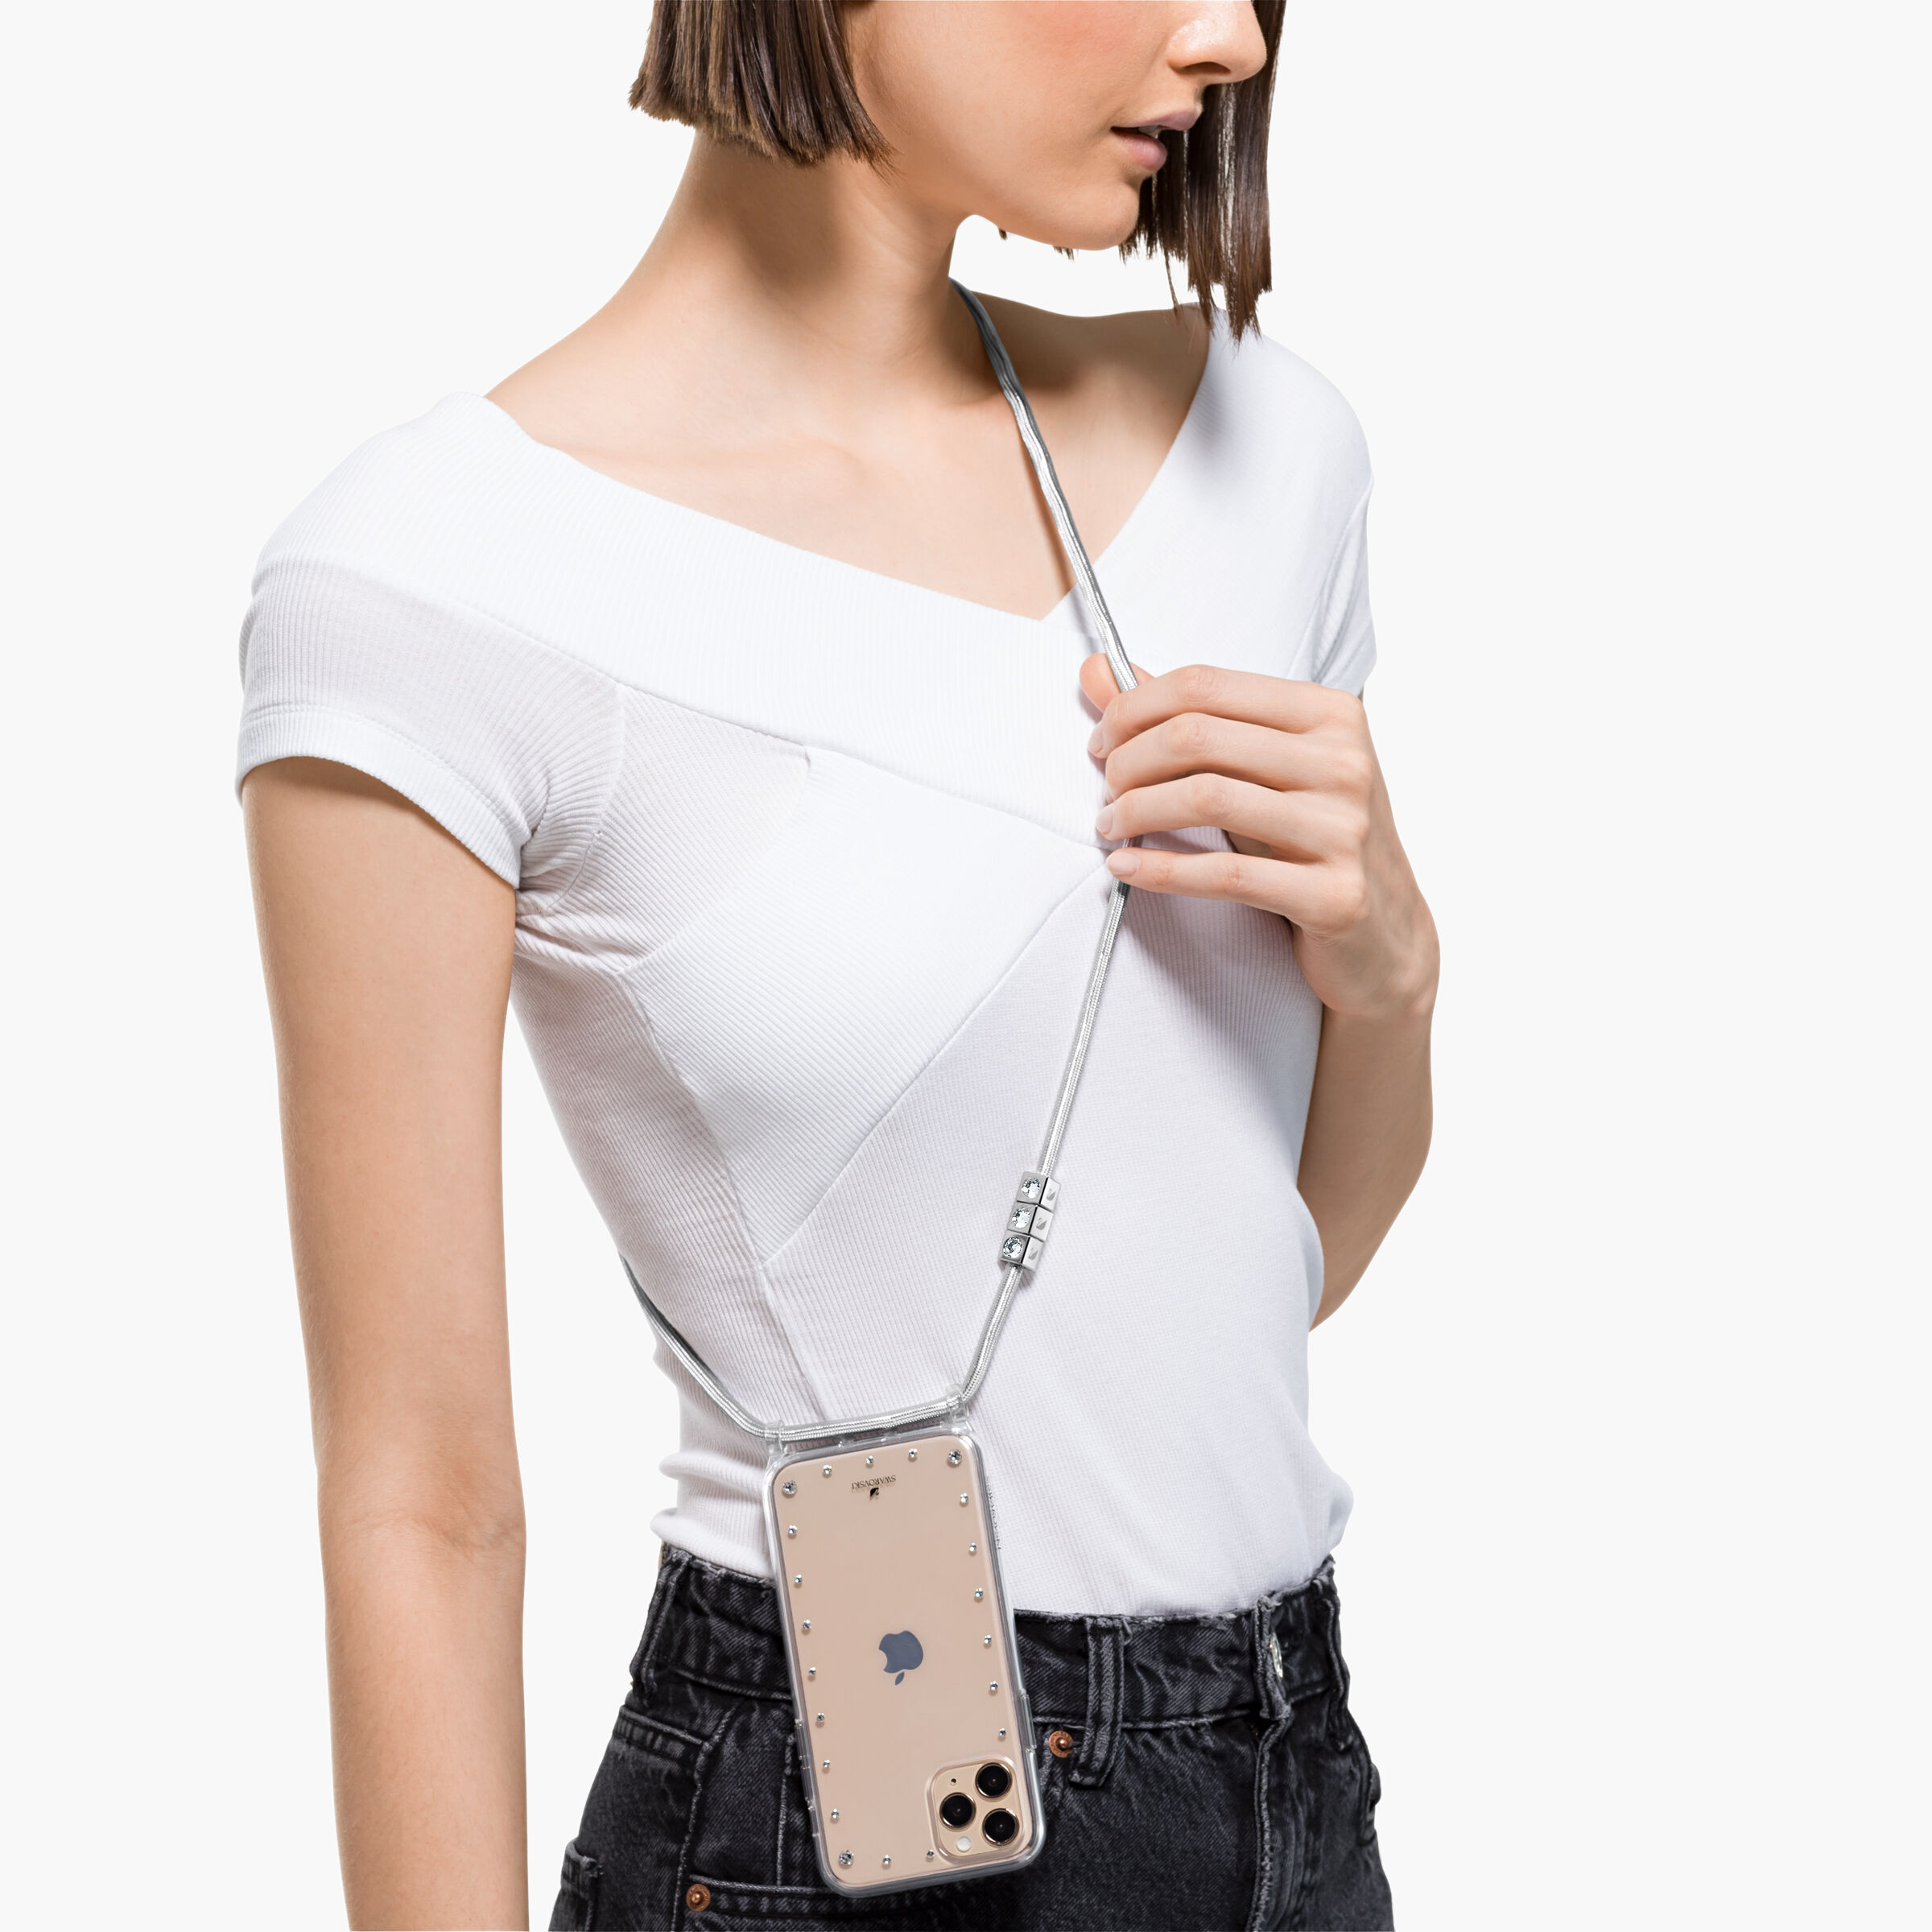 necklace crossbody cell phone case for| Alibaba.com